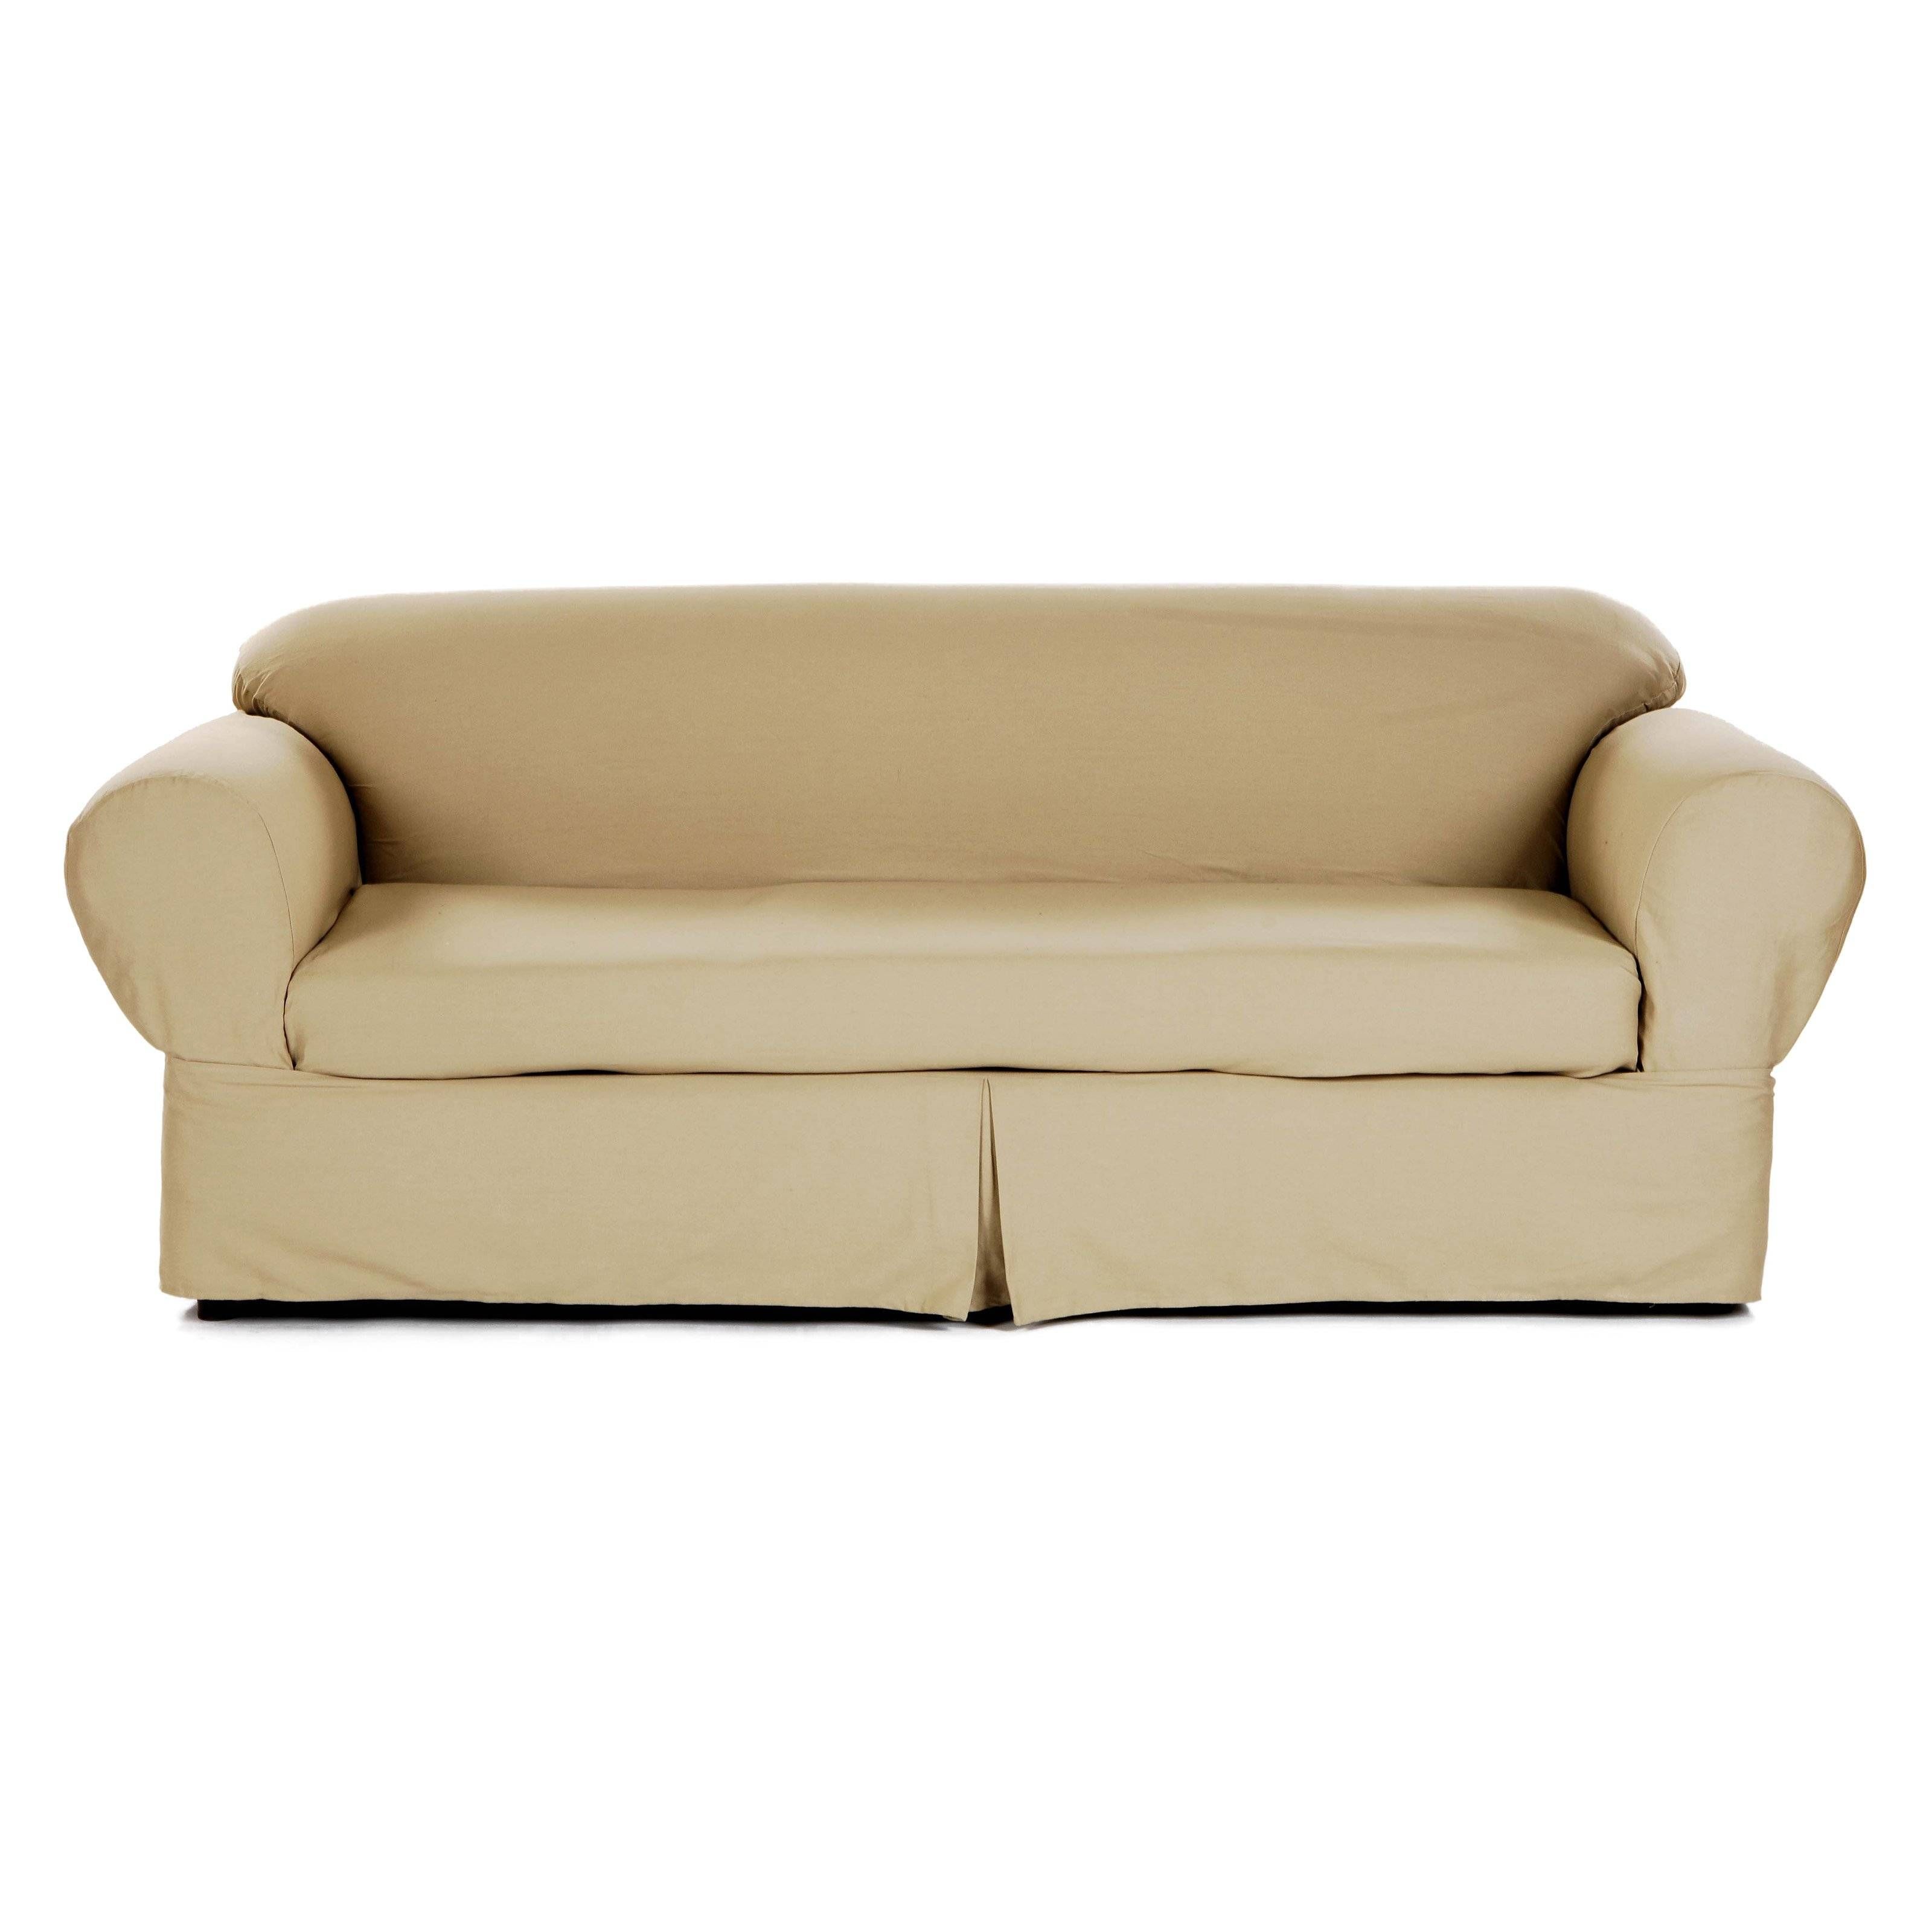 Classic Slipcovers Brushed Twill 2 Pc (View 30 of 30)